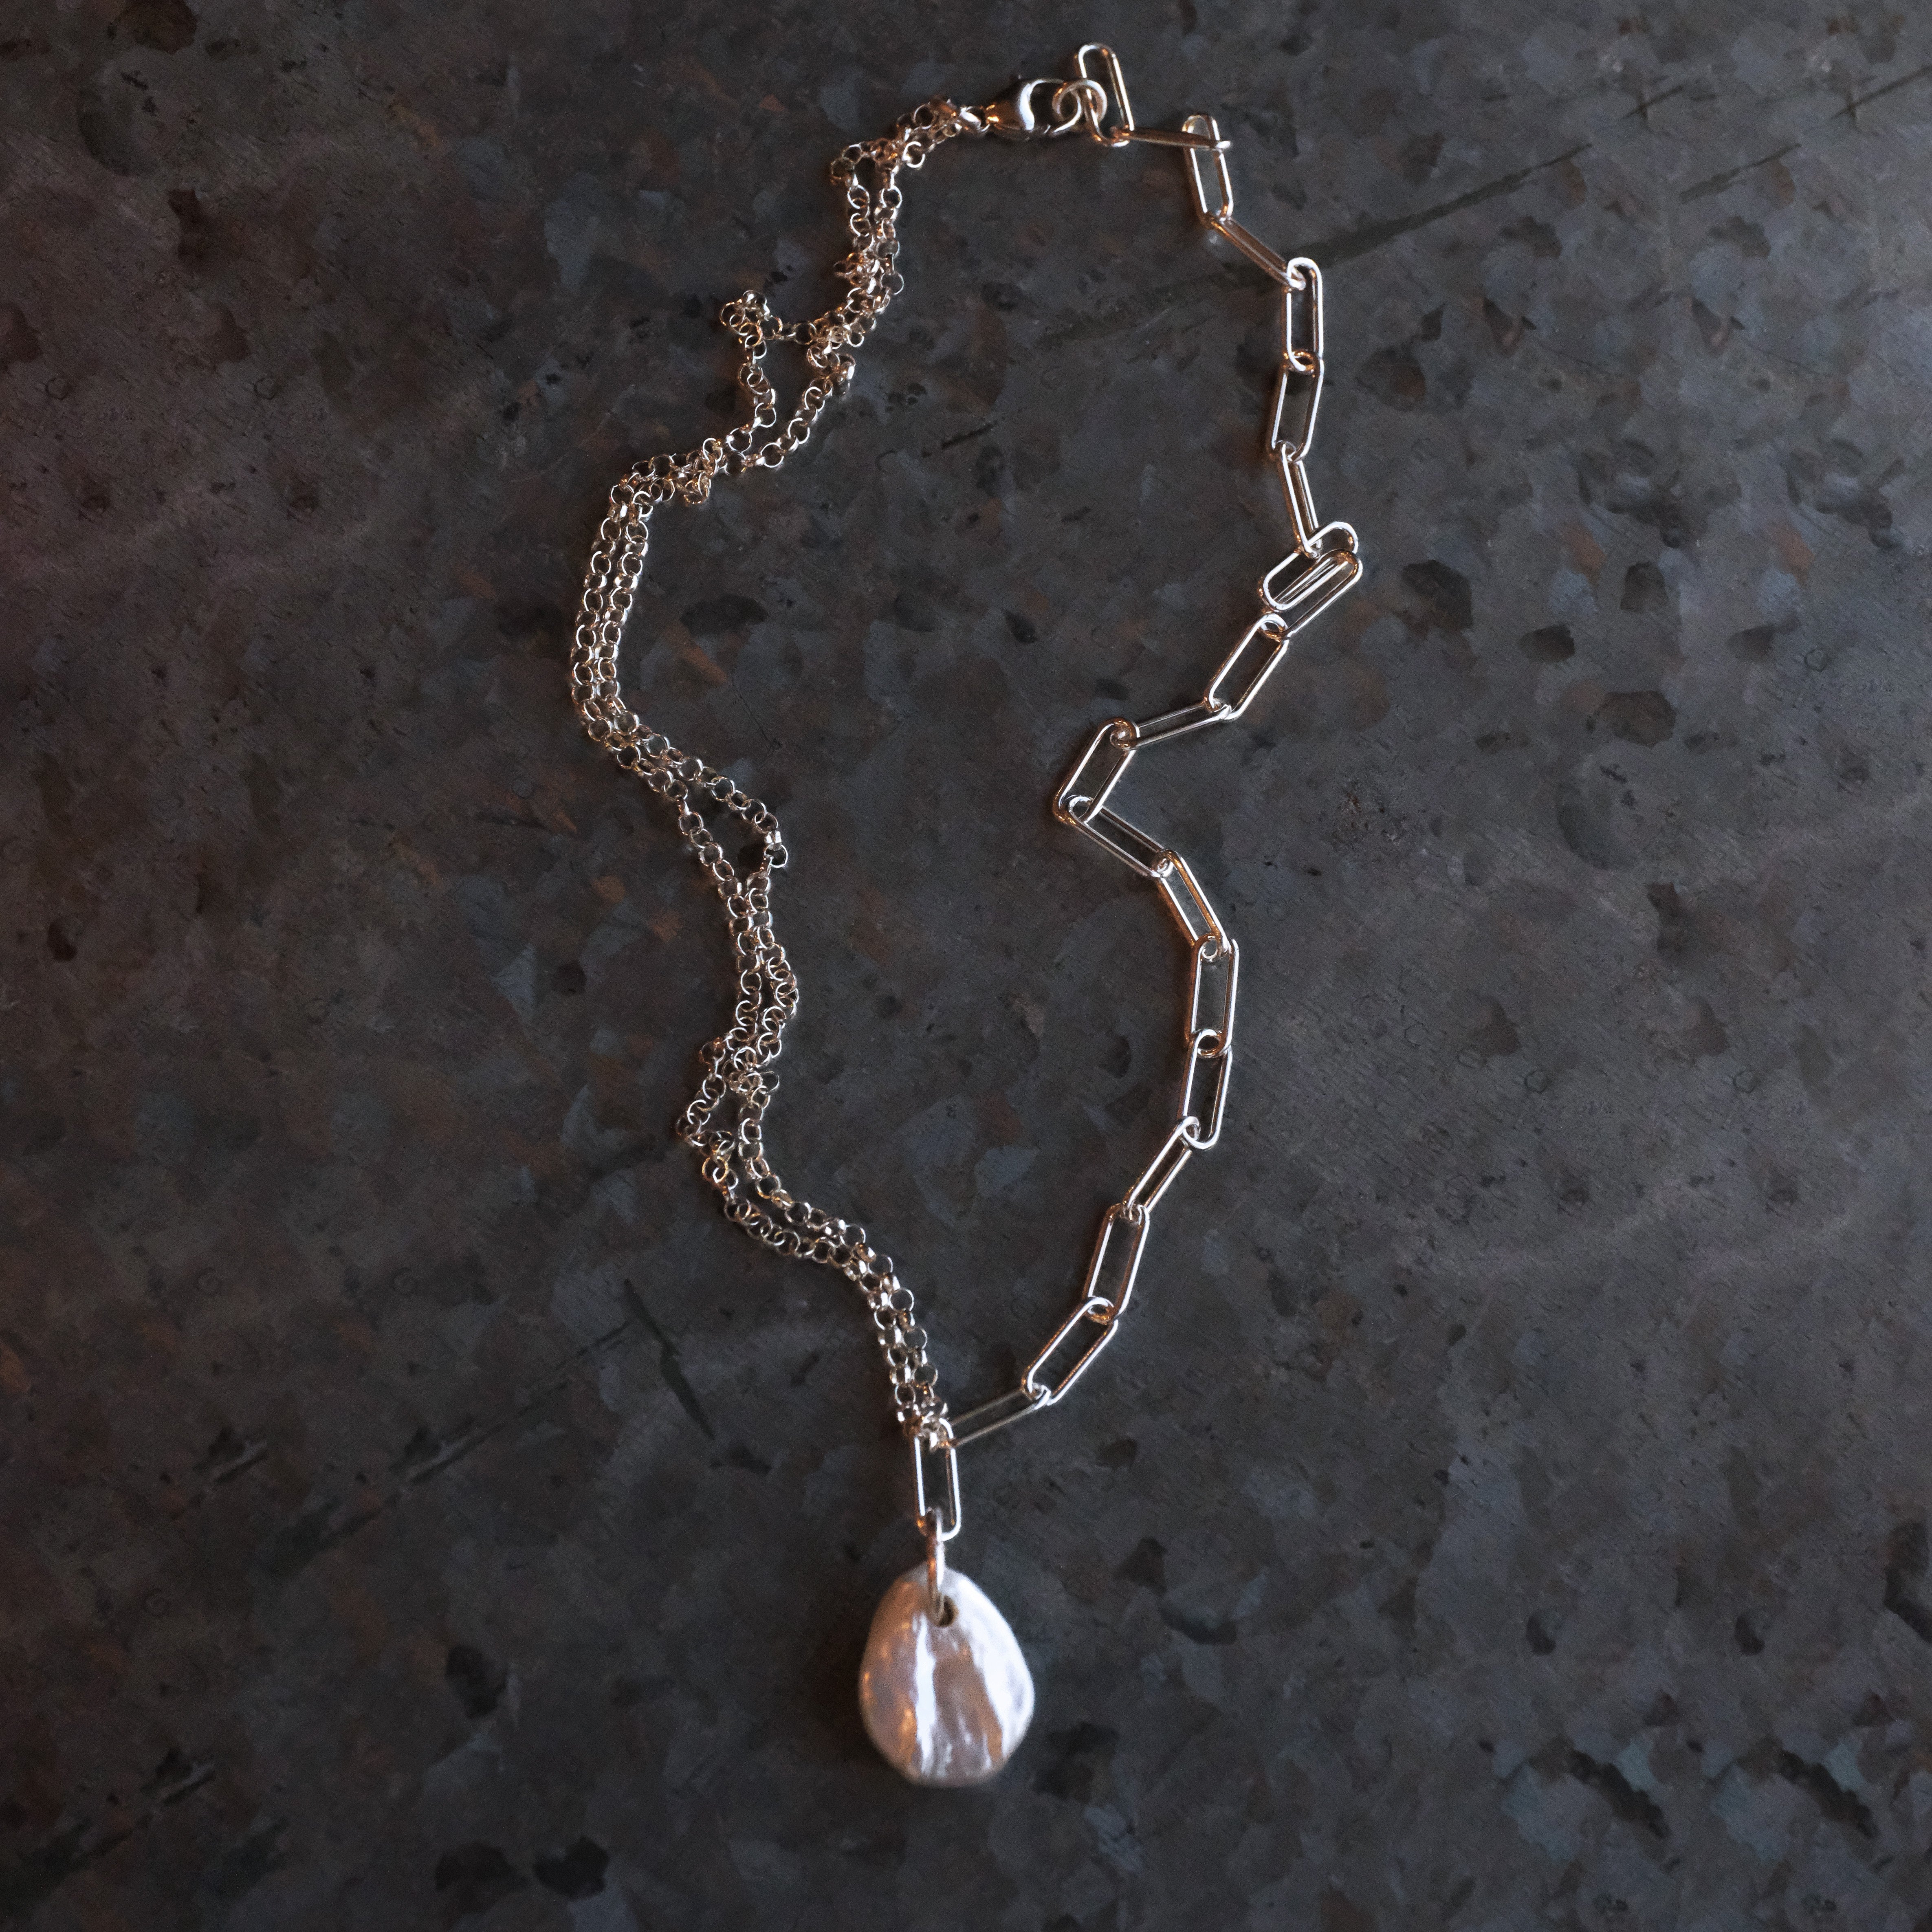 Pearl + Sterling Apricity Necklace - One of a Kind